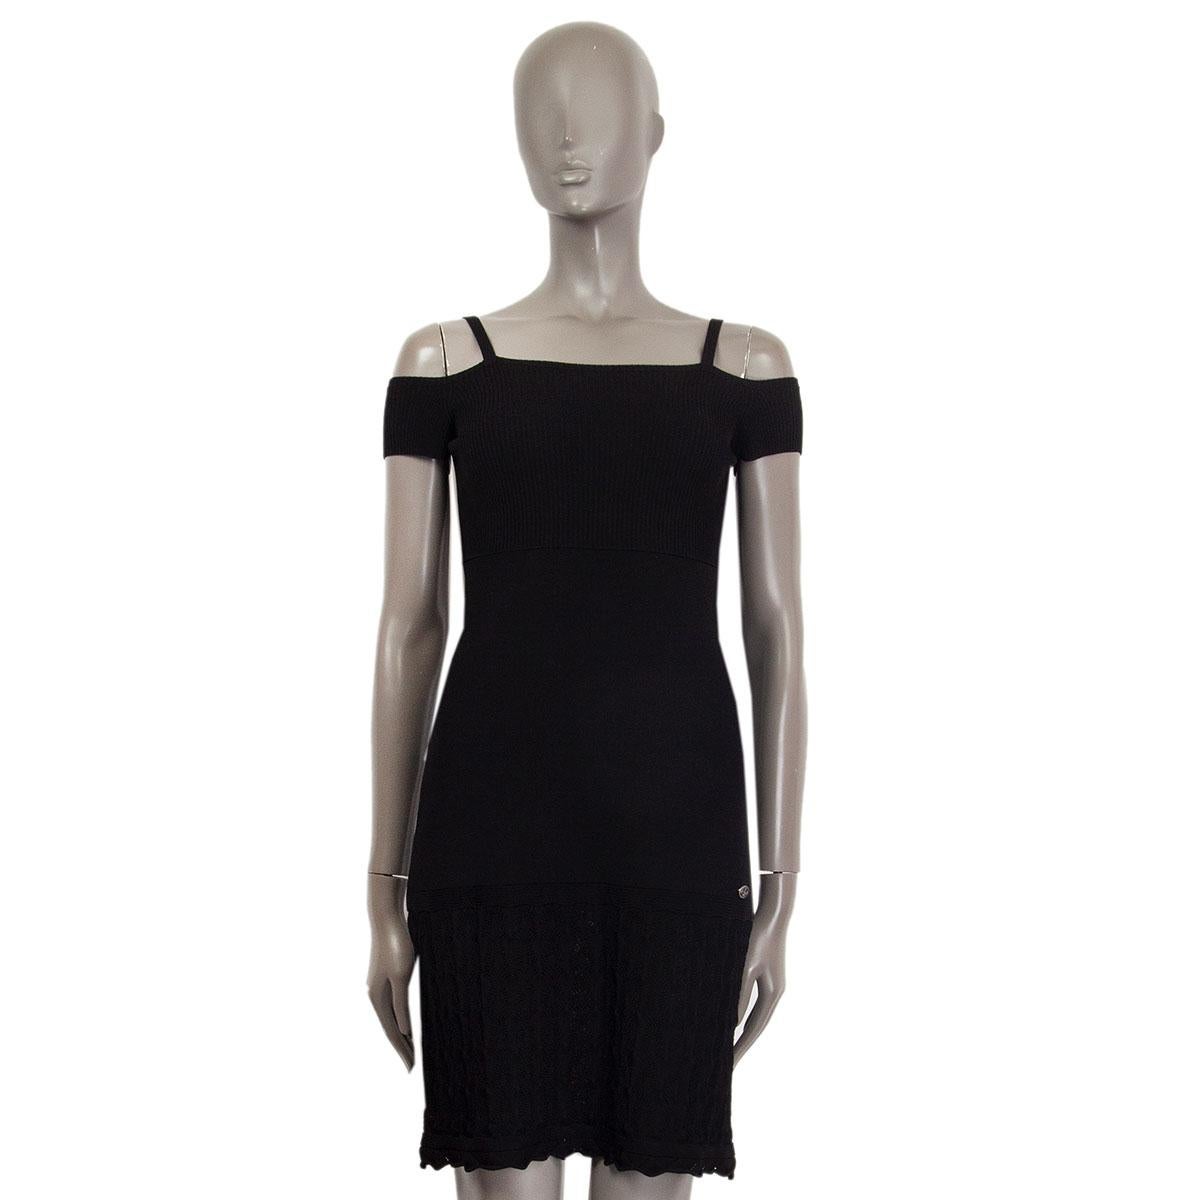 100% authentic Chanel cut out short sleeve dress in black stretchy viscose (80%) and polyamide (20%) with a small logo embossed brooch at the left hip height. Slip on dress with a knitted skirt. Unlined. Has been worn and is in excellent